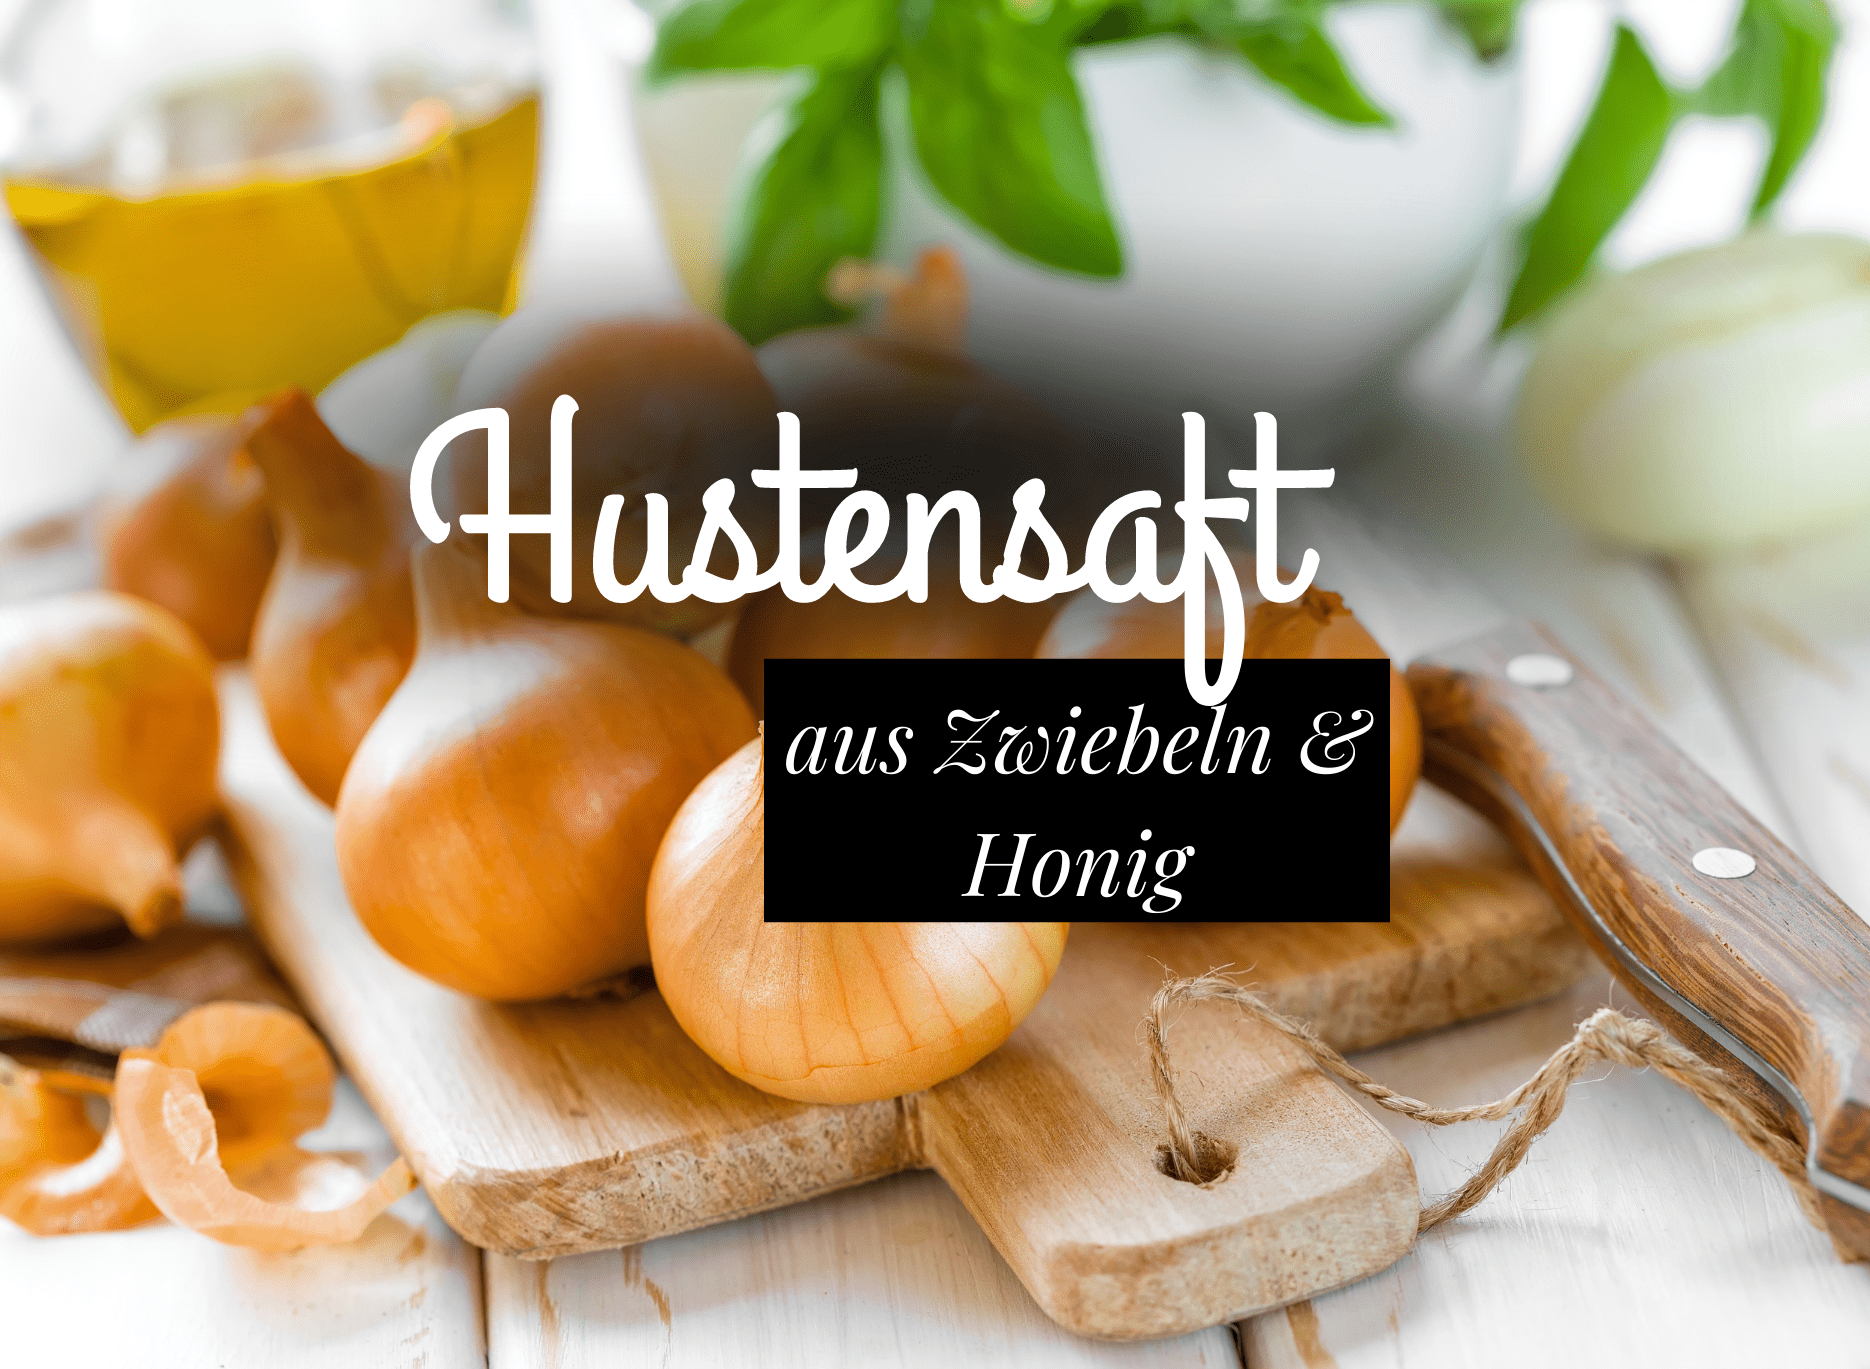 You are currently viewing Zwiebel-Hustensaft selber machen